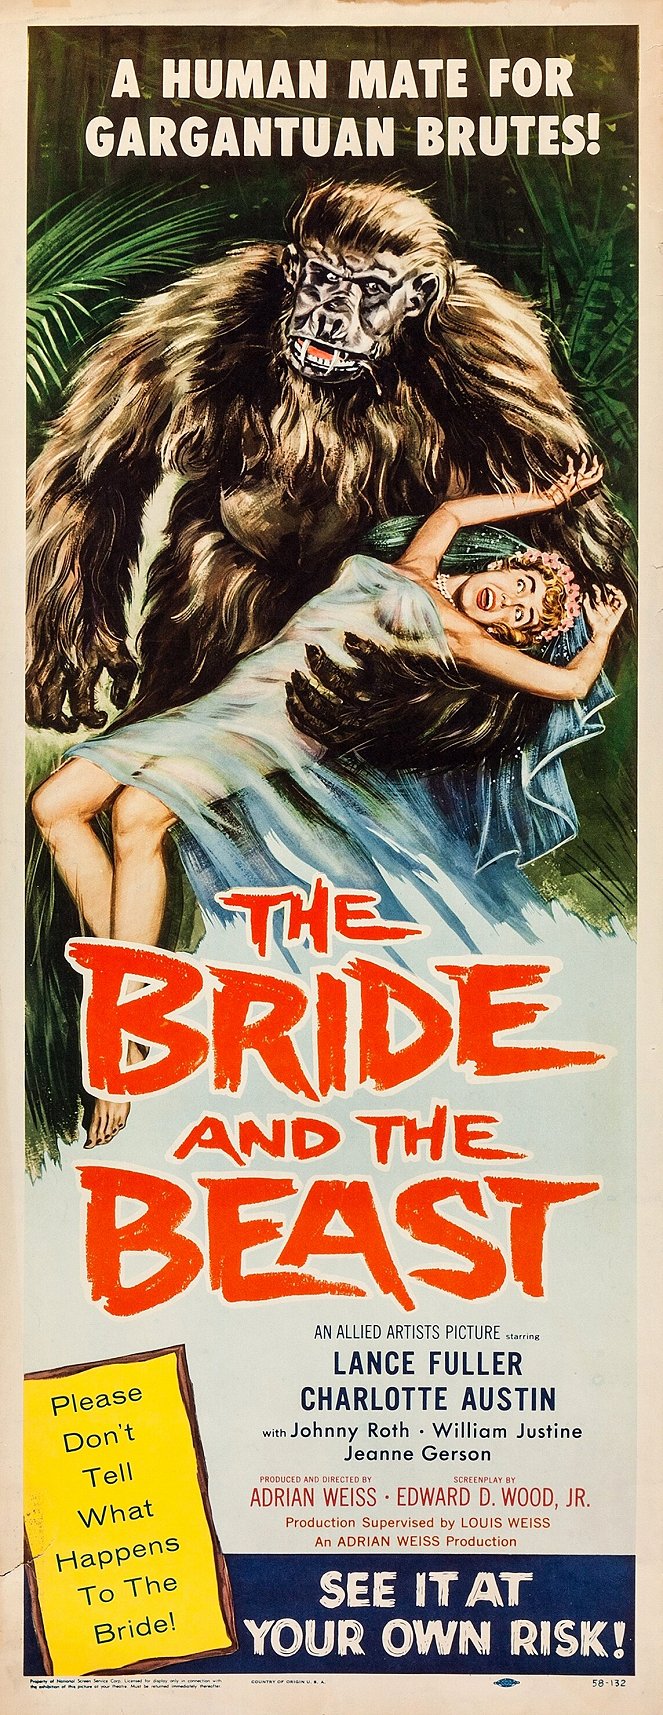 The Bride and the Beast - Julisteet